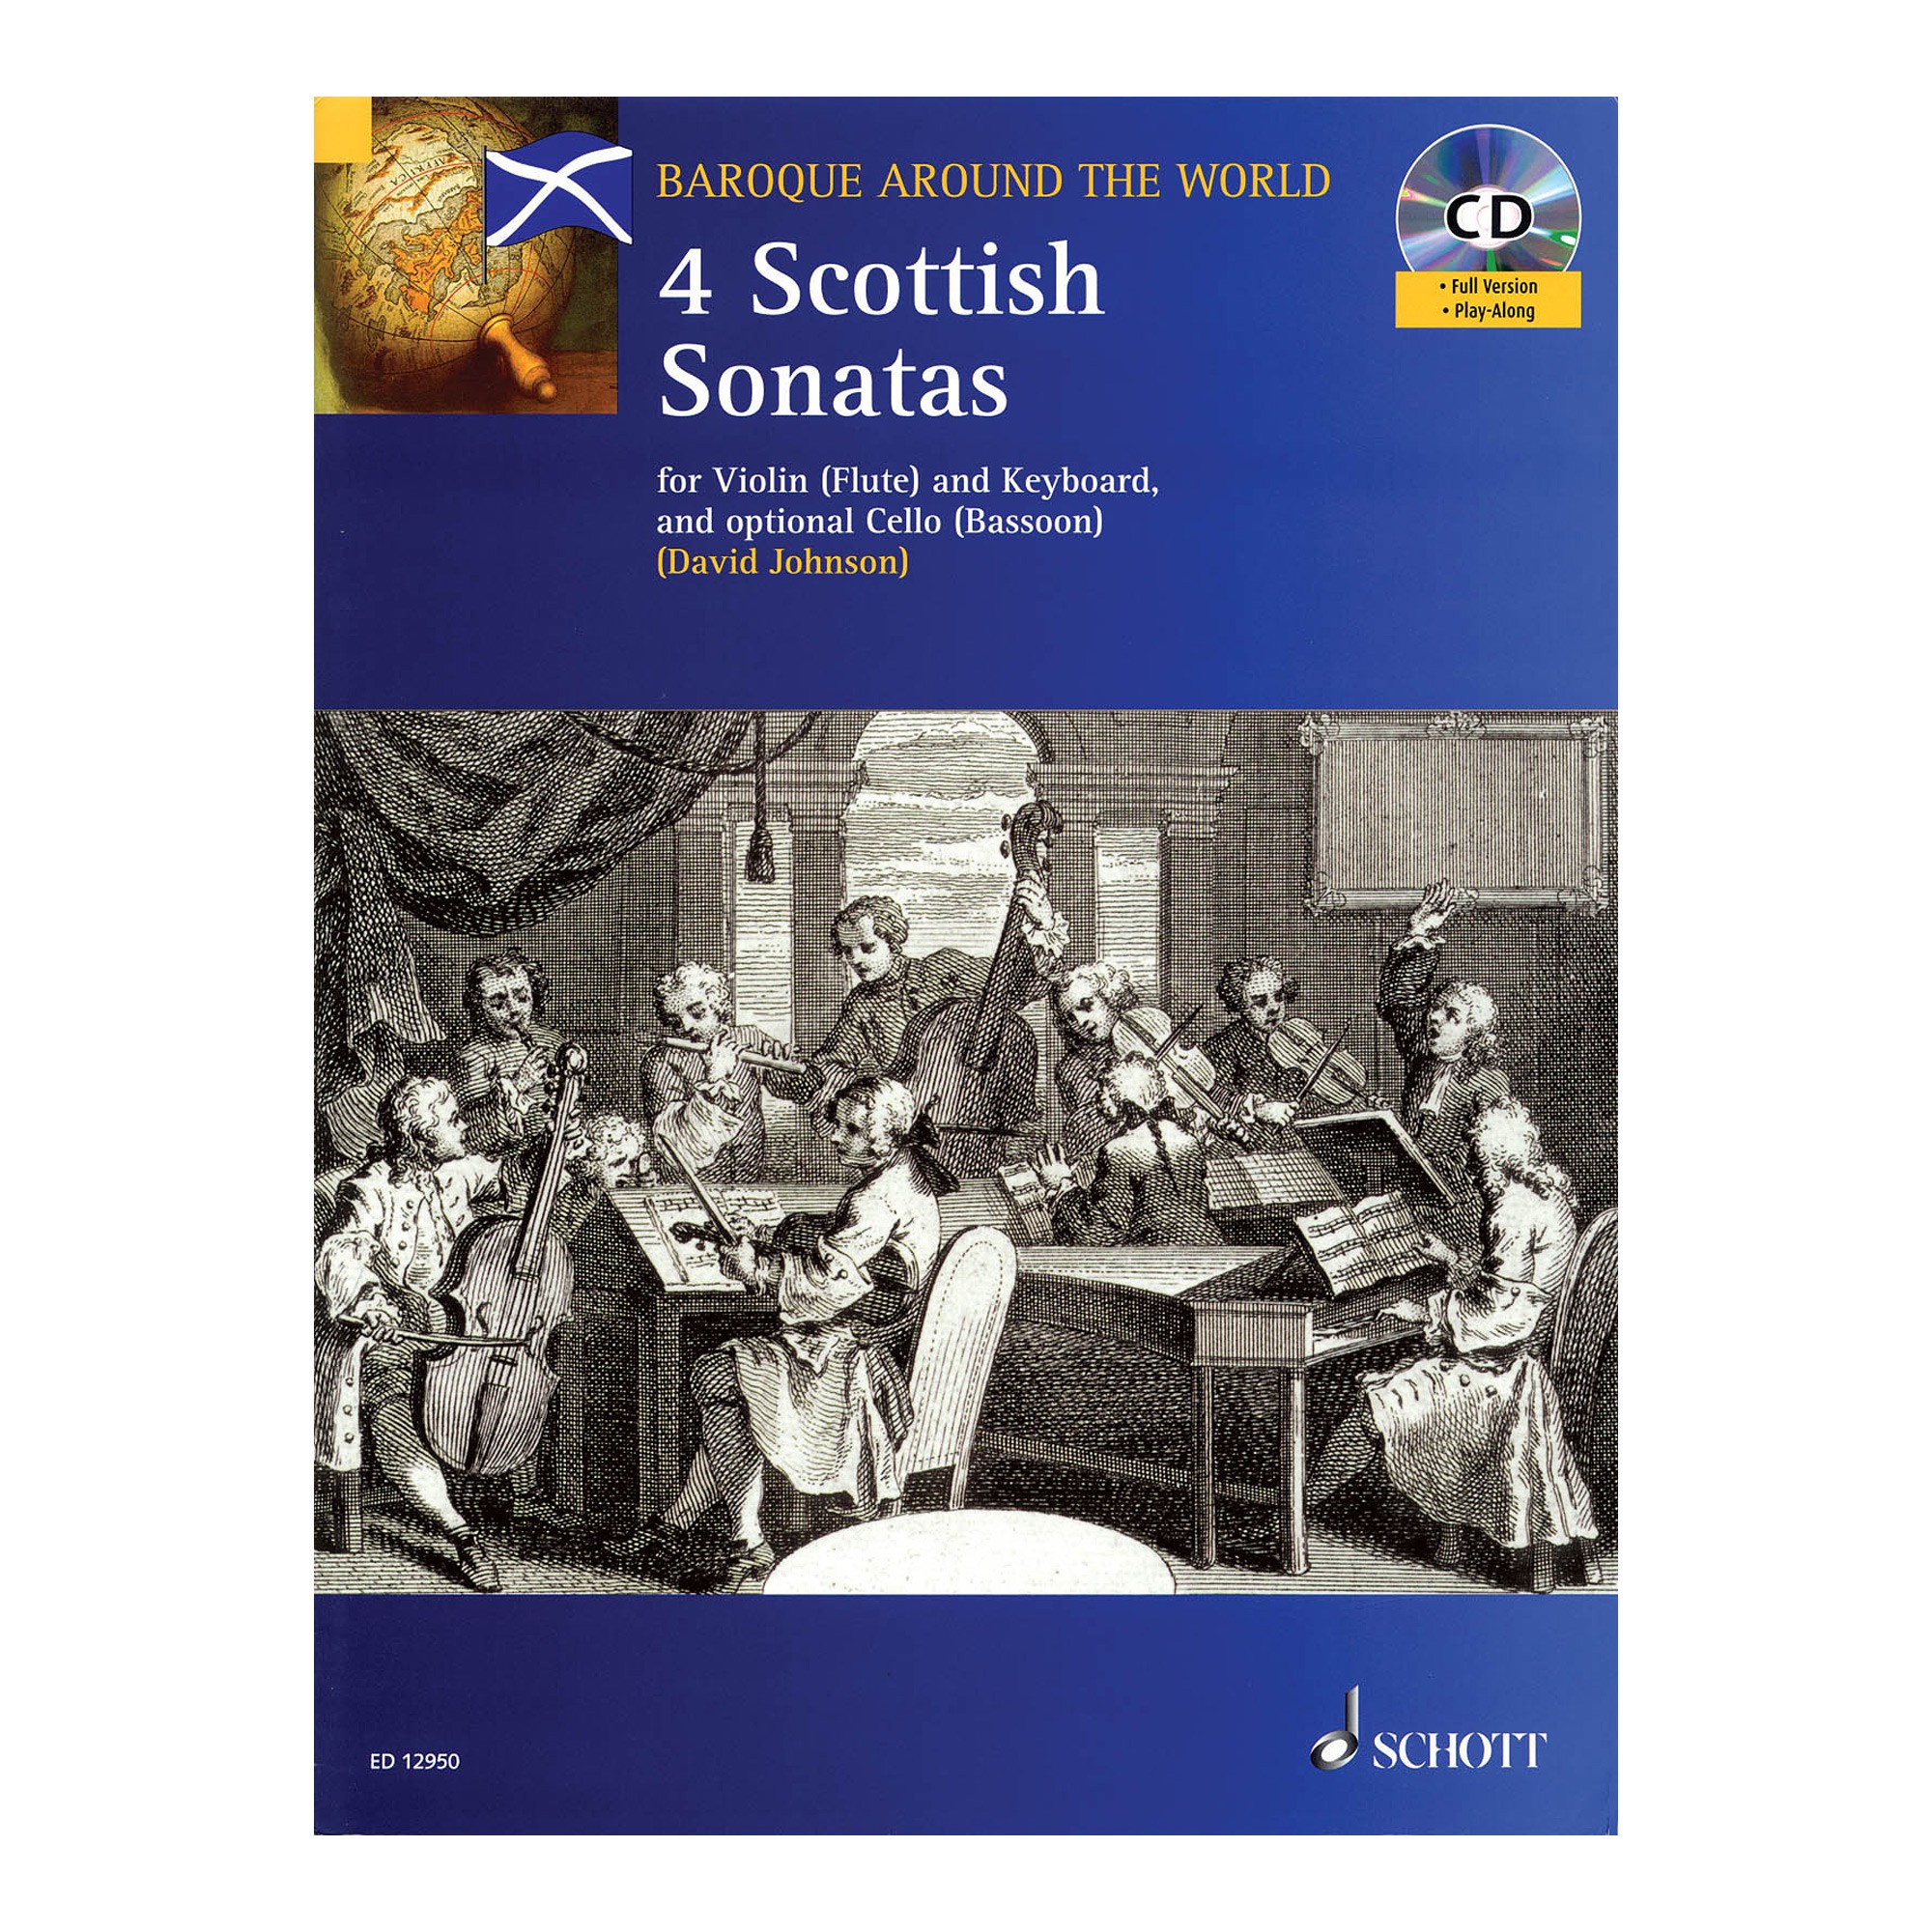 4 Scottish Sonatas: For Violin and Keyboard with Optional Cello Part